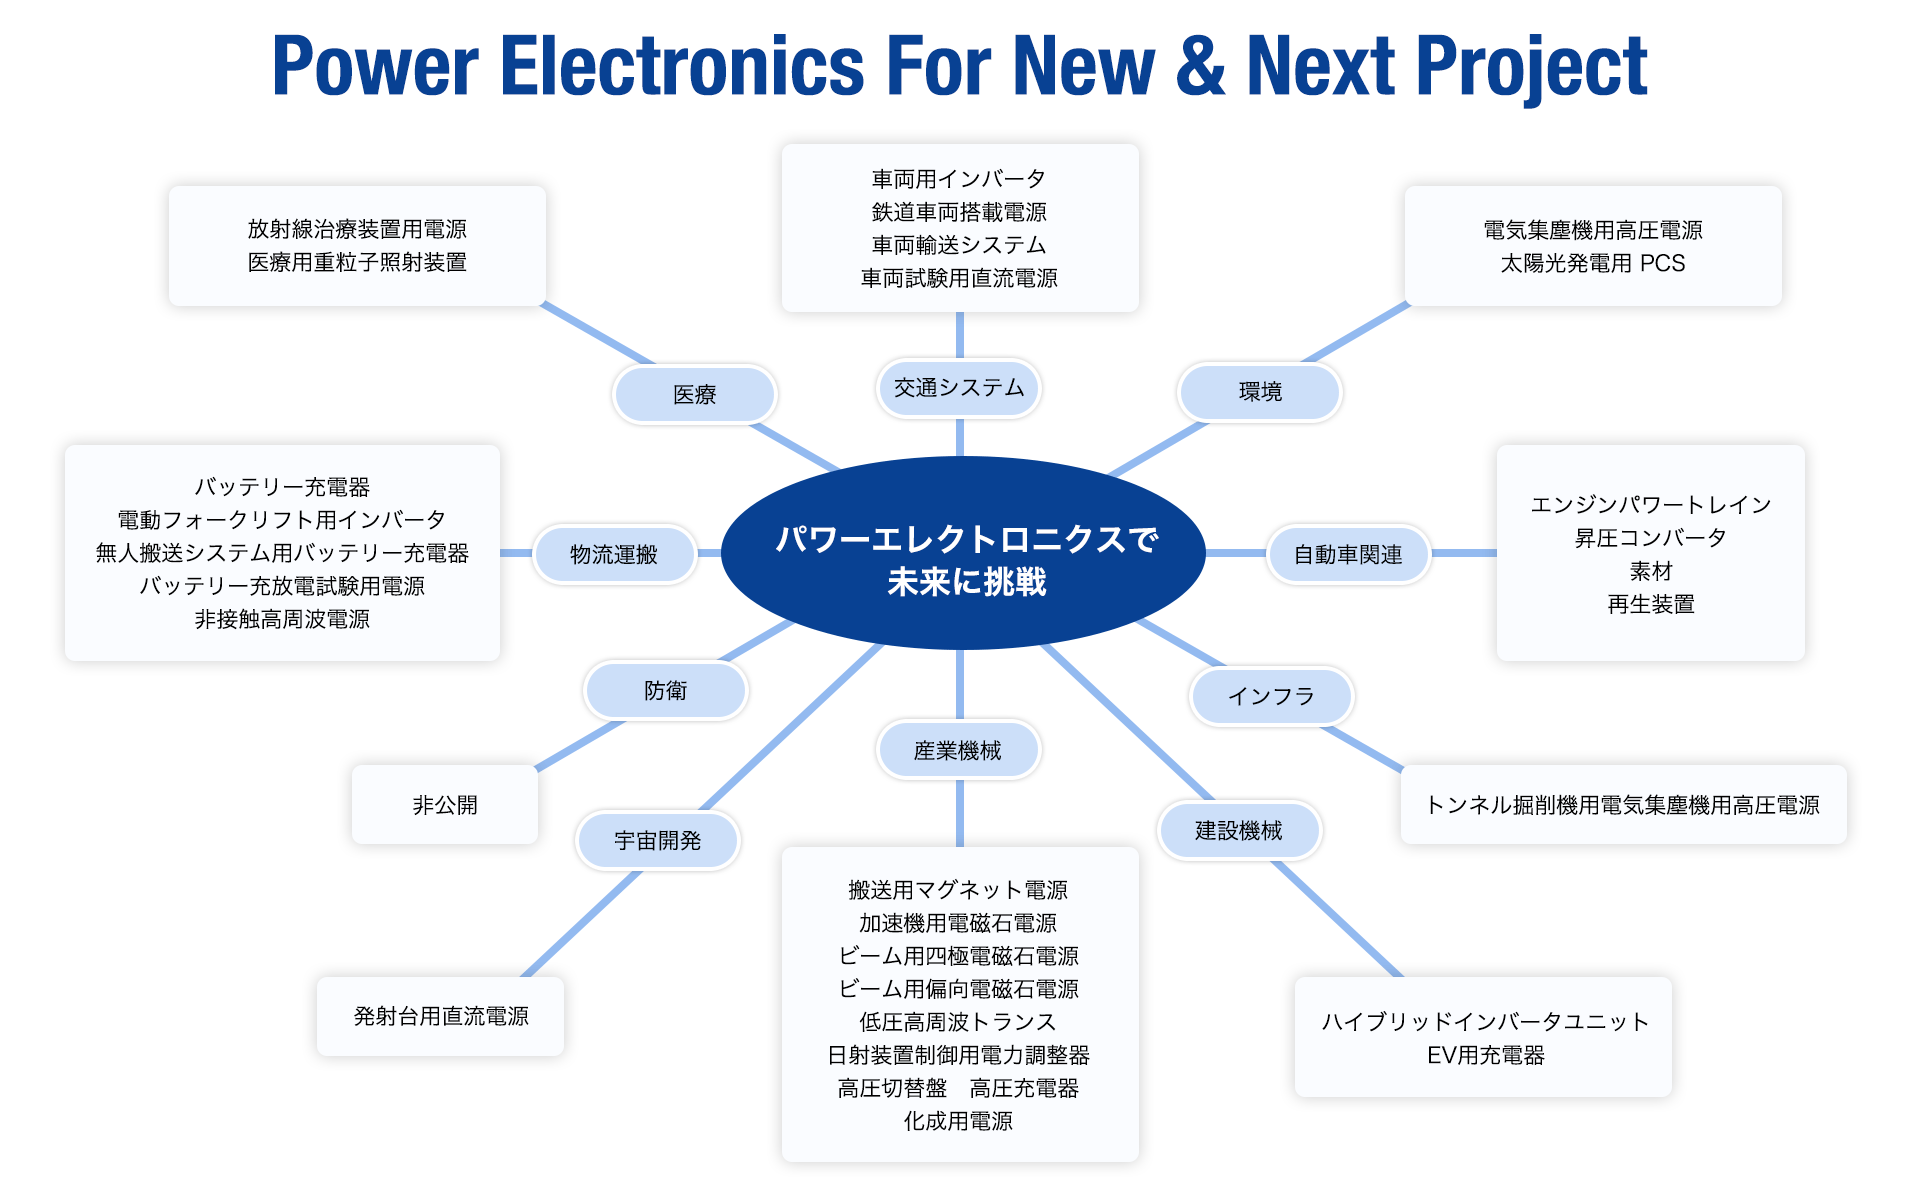 Power Electronics For New & Next Project